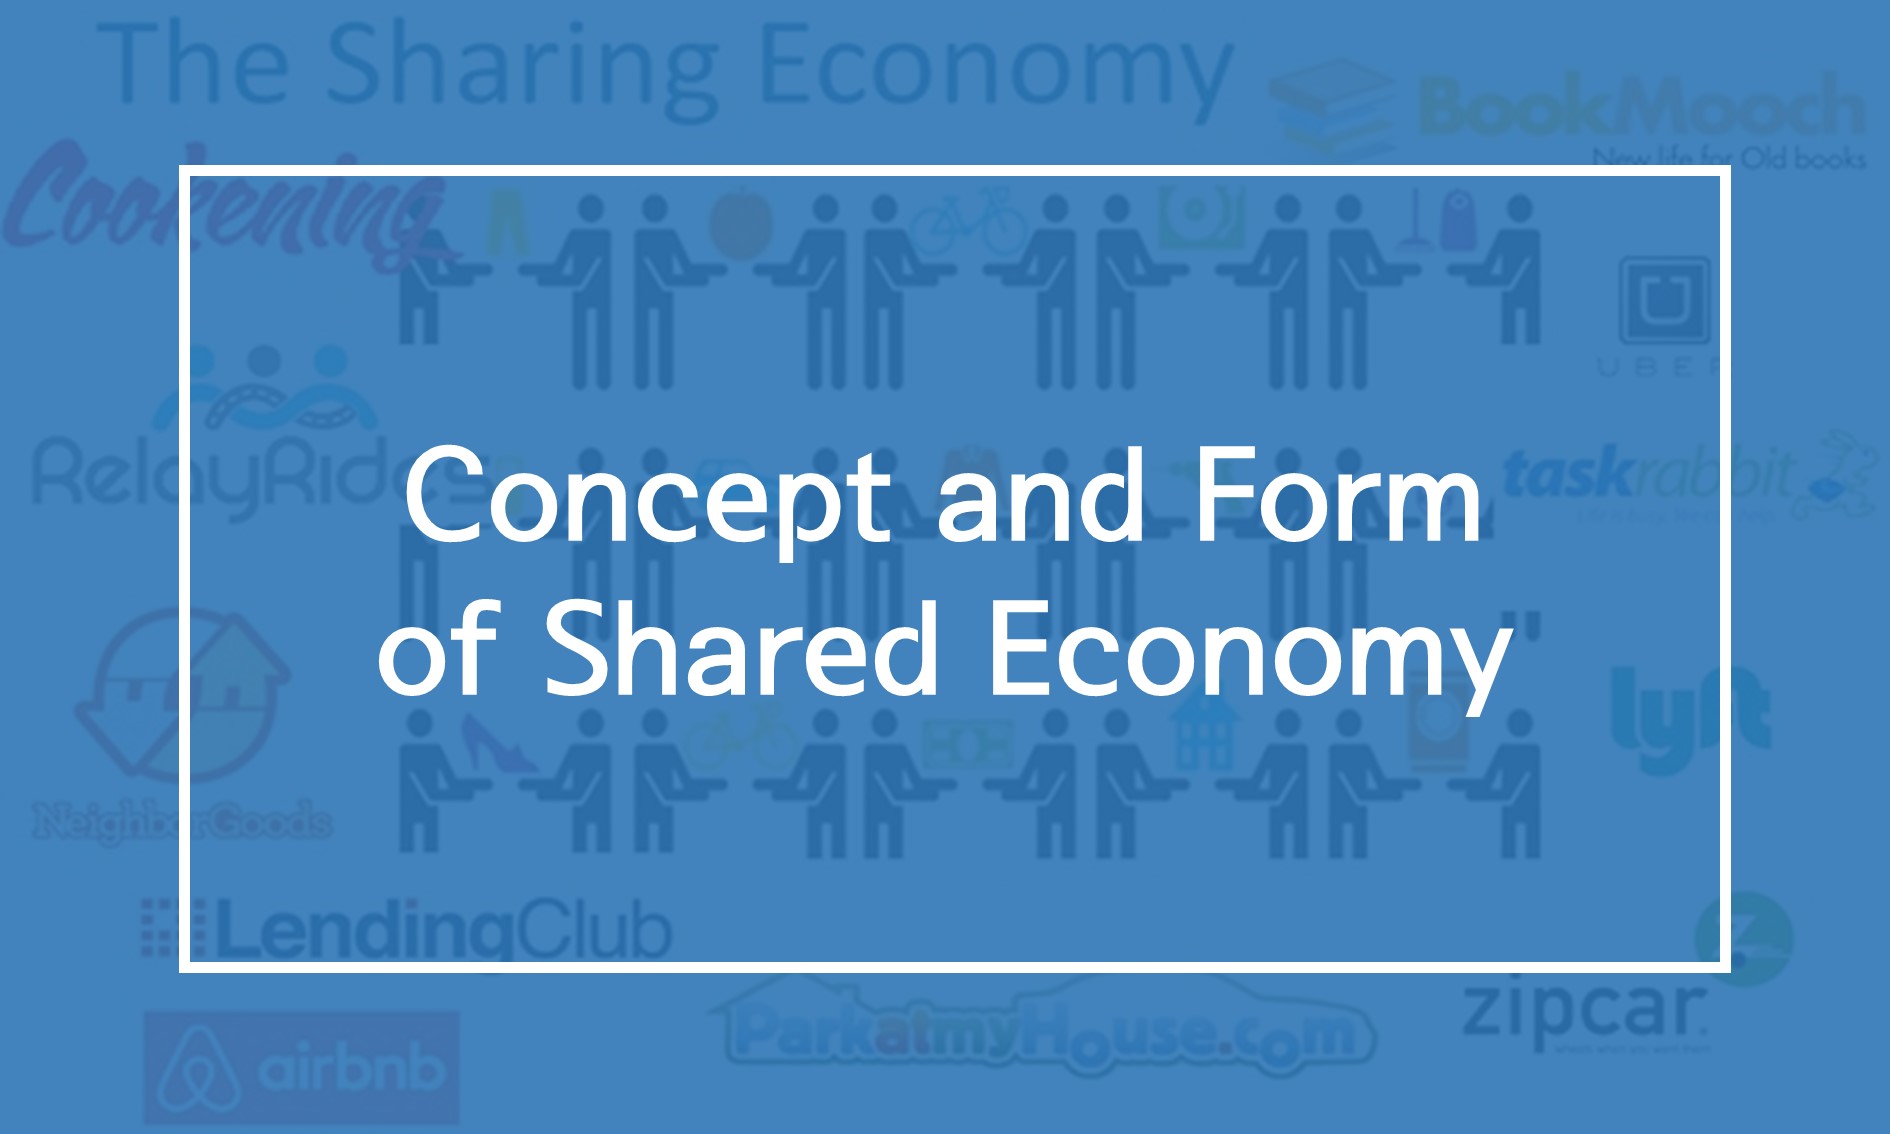 [Resources] Concept and Form of Shared Economy